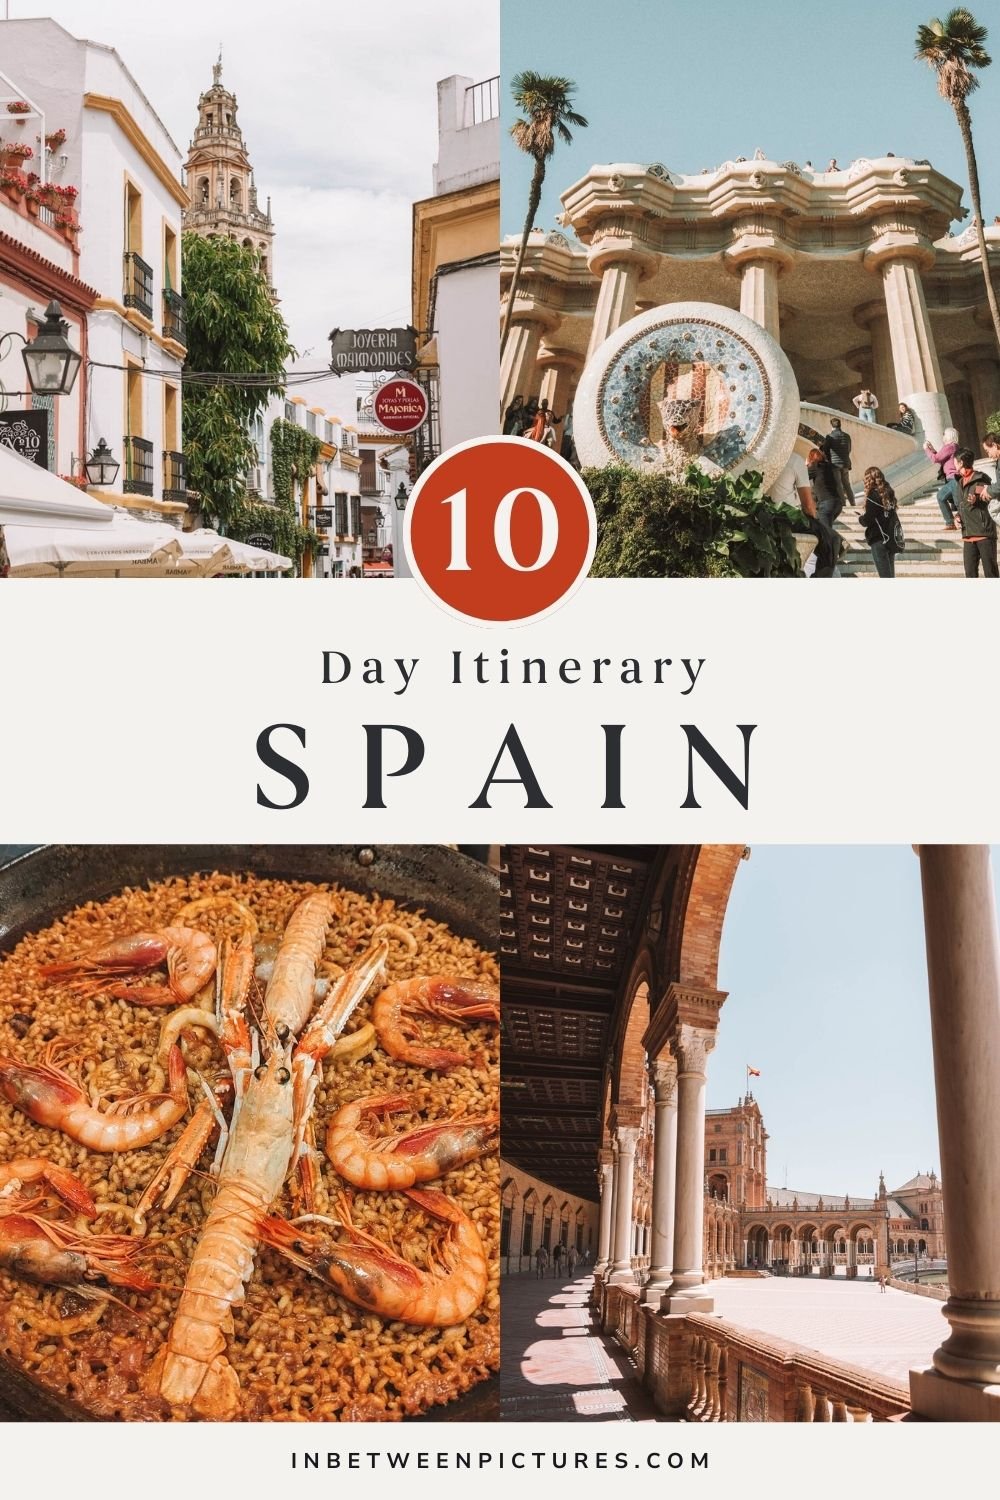 The Ultimate 10-Day Spain Itinerary covering the main cities of Madrid, Valencia, Seville, Barcelona